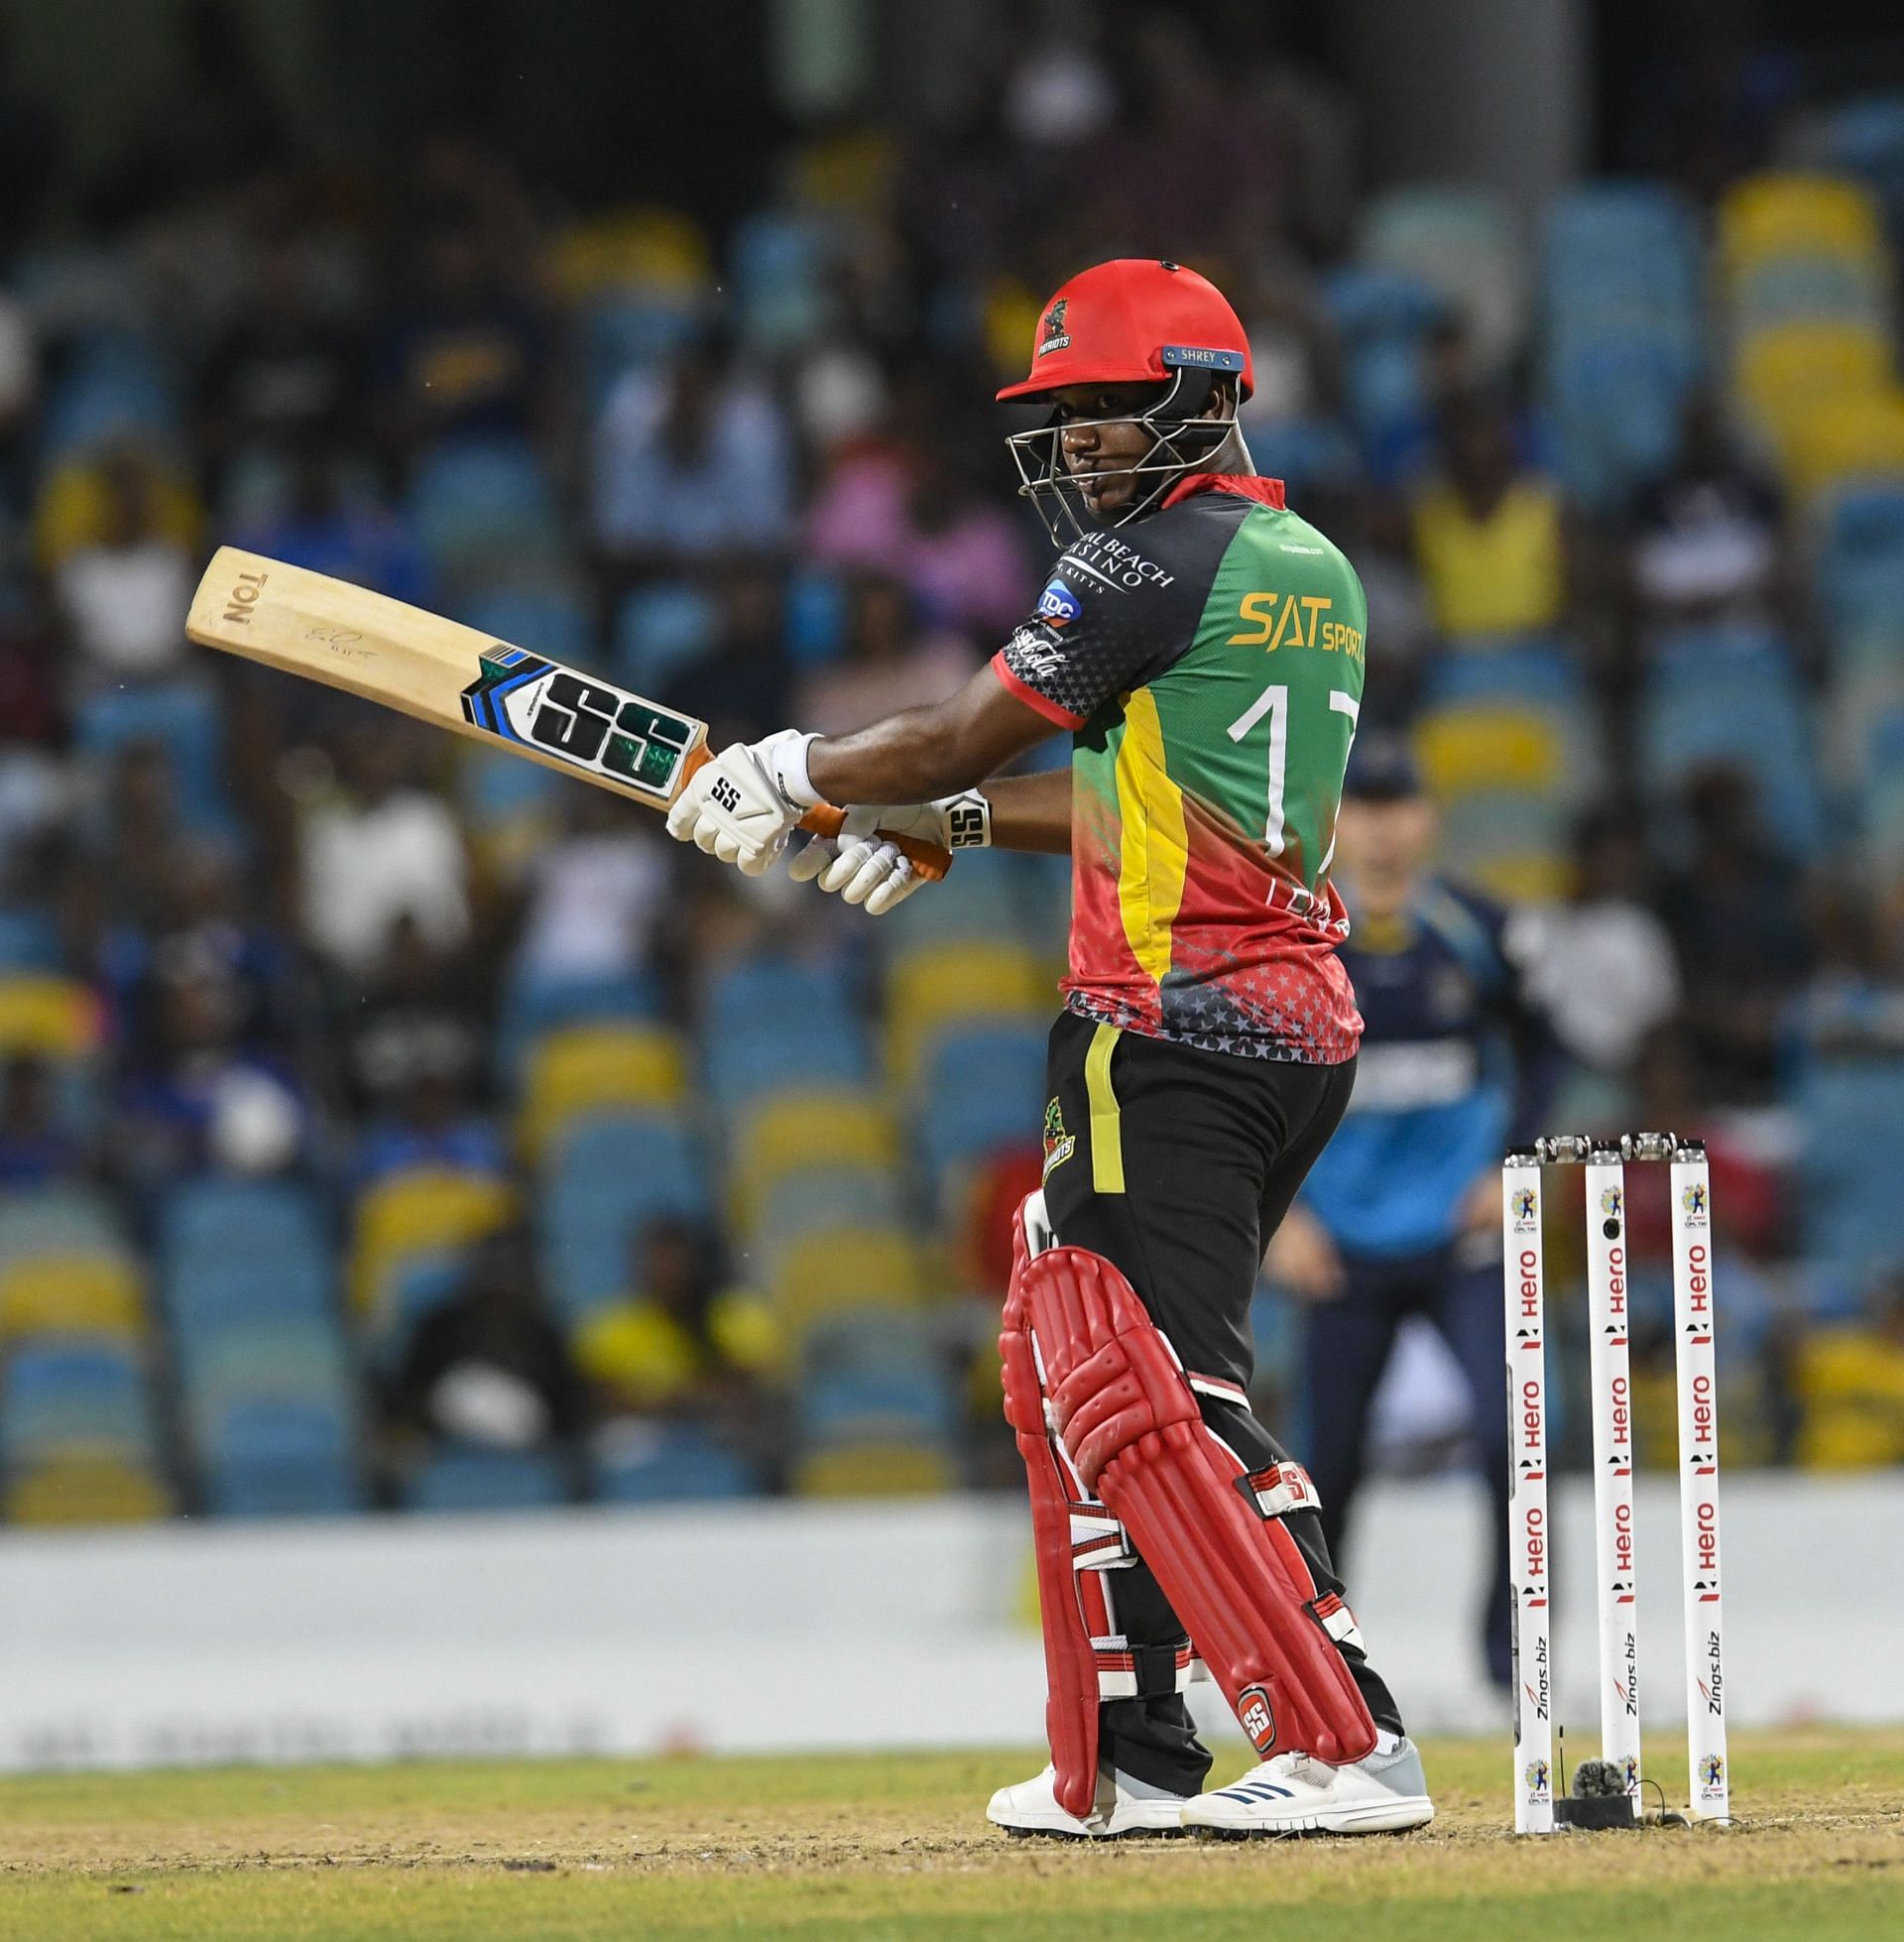 Evin Lewis in action during the Caribbean Premier League (CPL) [Pic credits: Getty]